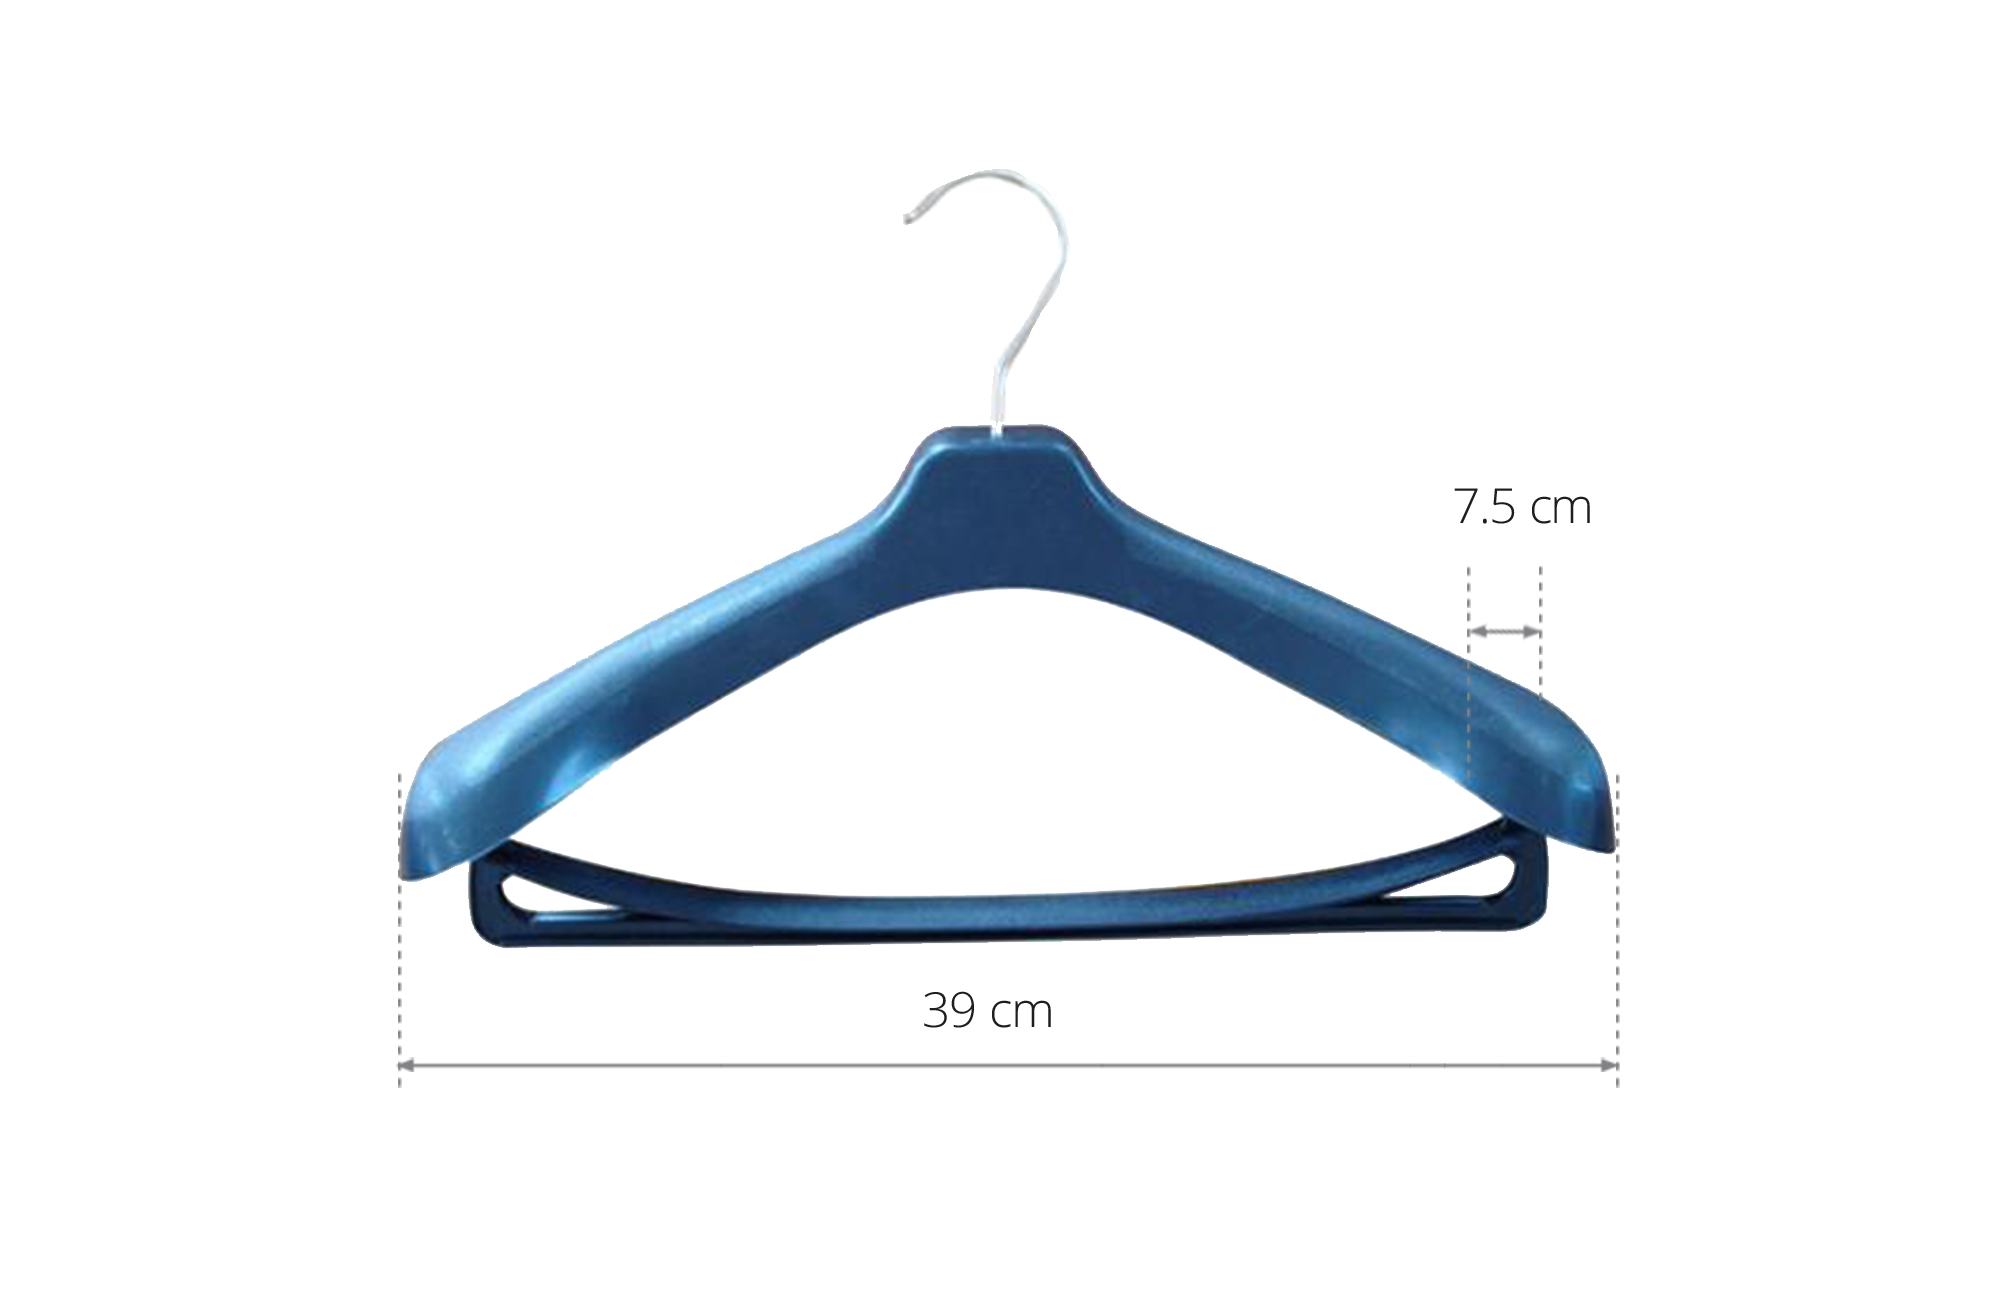 Fast Delivery Suntex Wholesale Plastic Plastic Hangers Competitive Price Customized Hangers For Cloths Anti-Slip Made In Vietnam